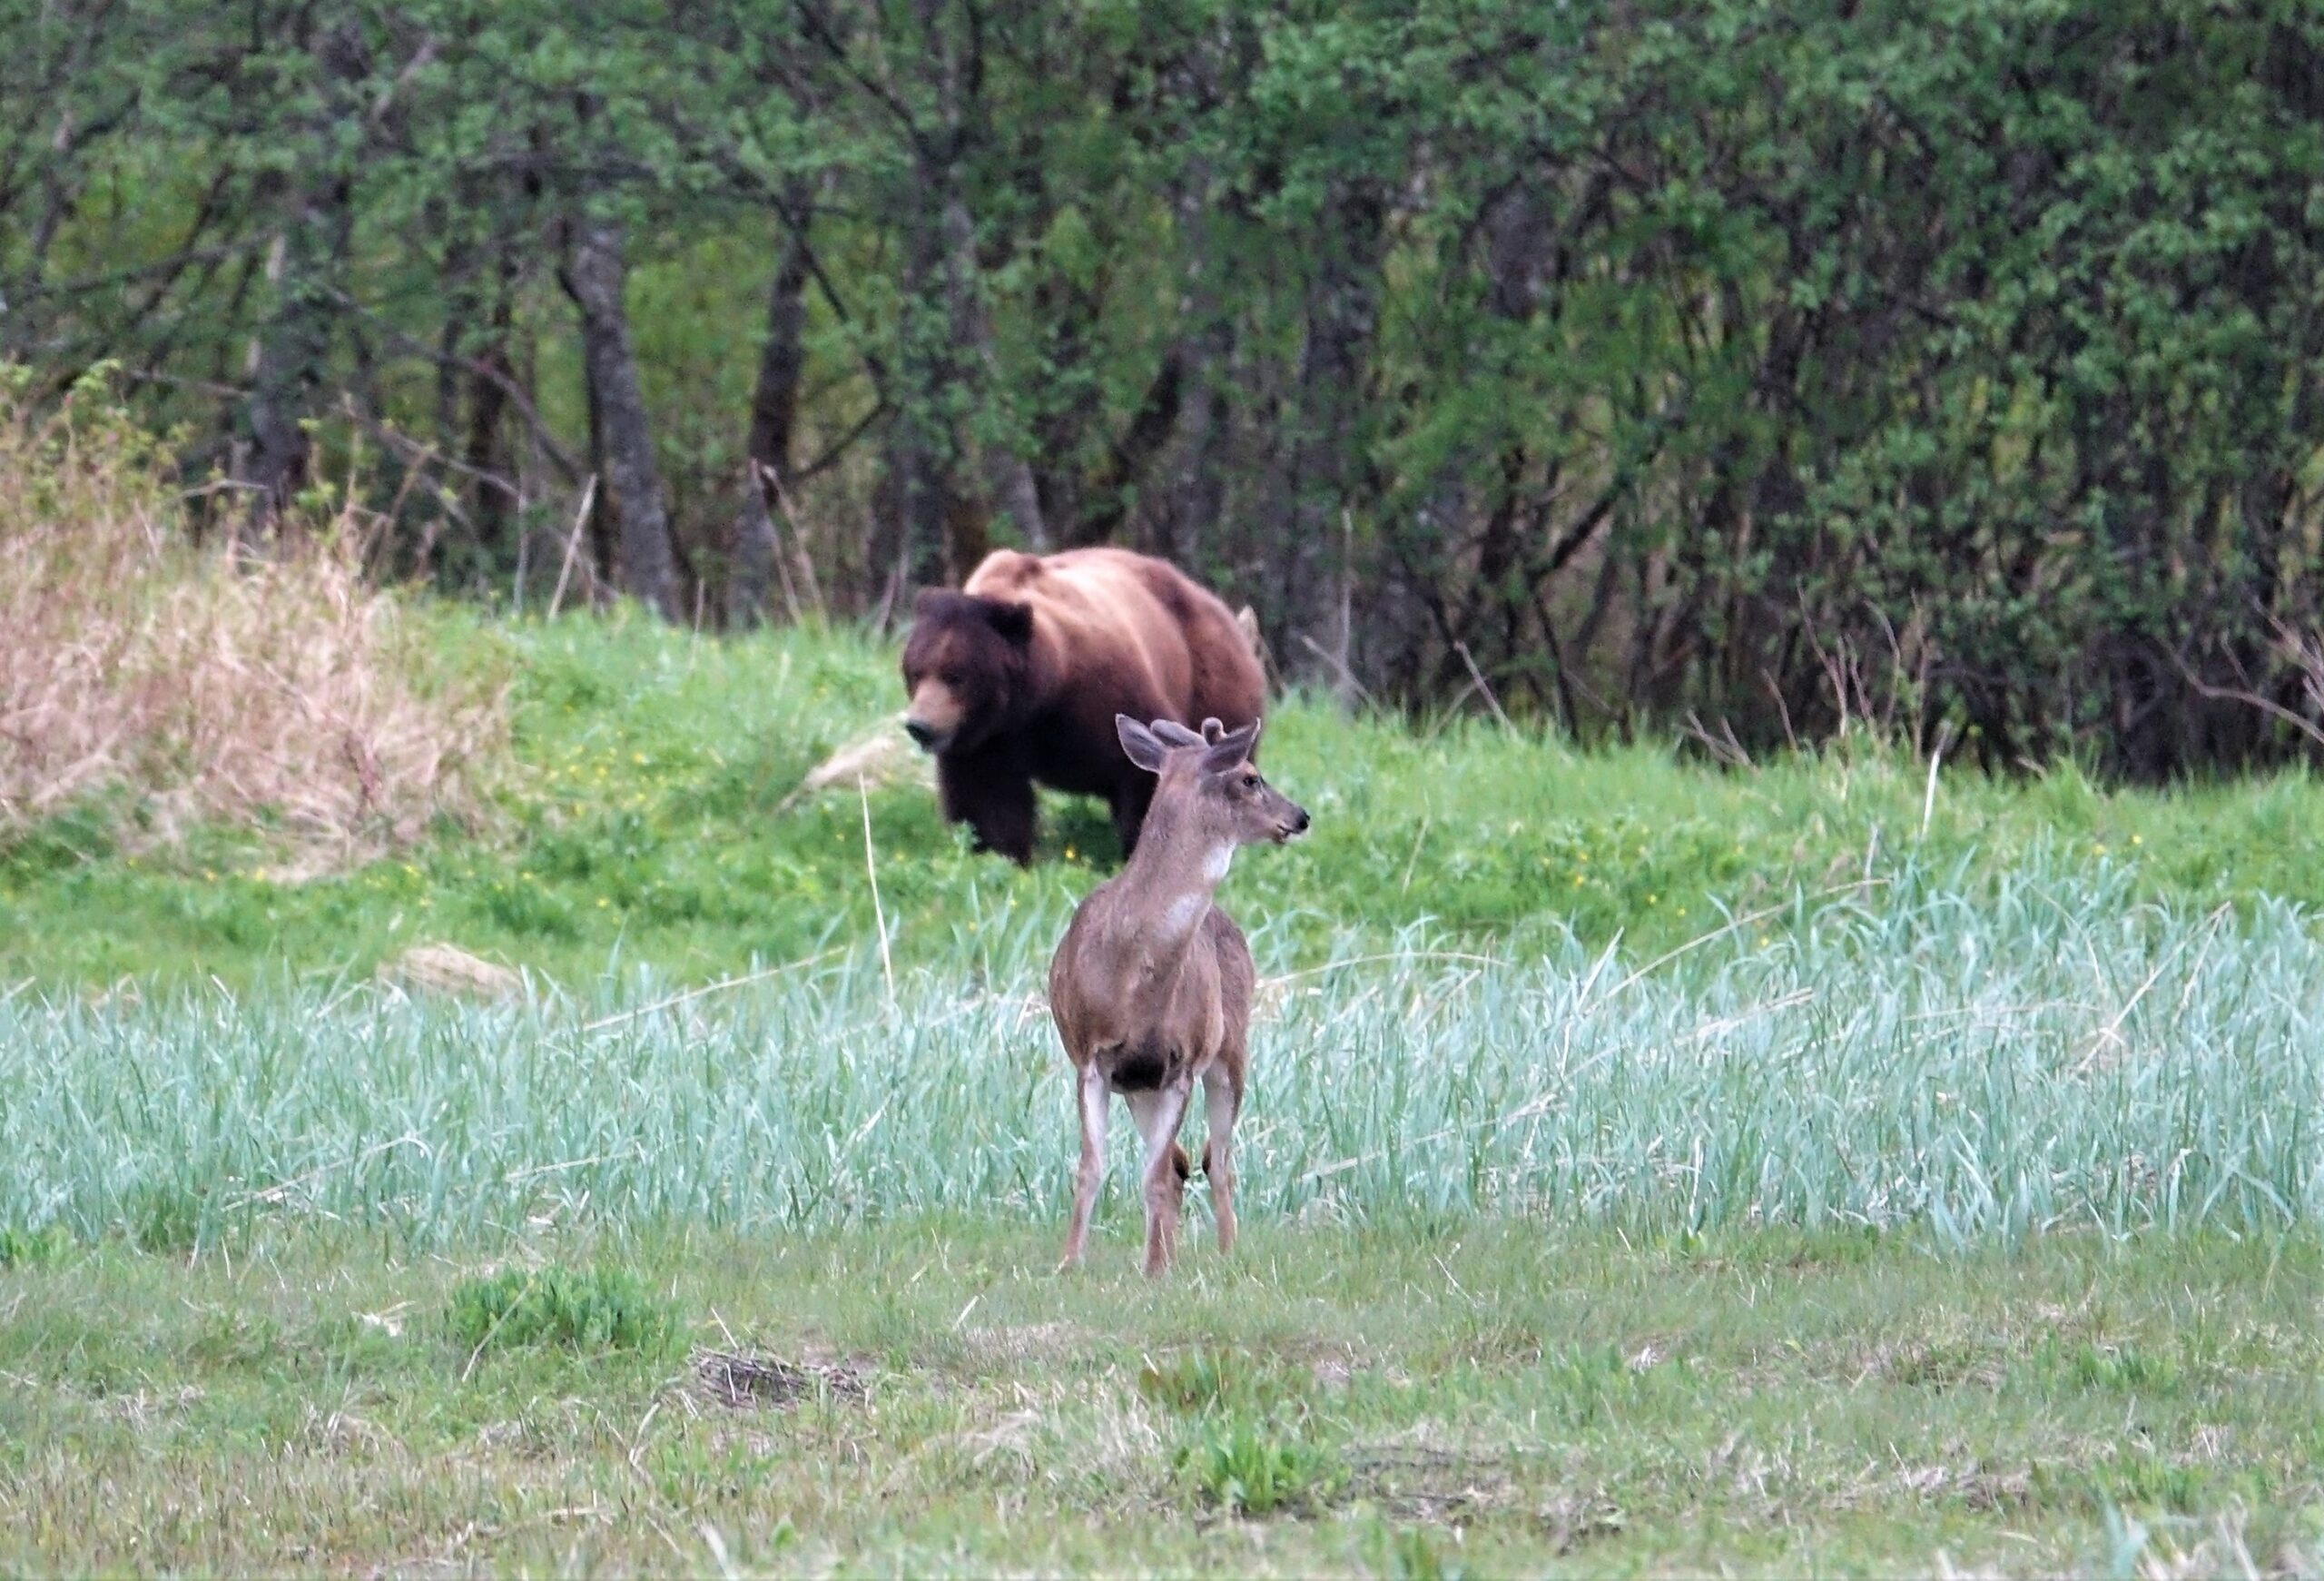 A blacktail deer turns his head to look over his shoulder at a brown bear nearby in a grassy clearing.